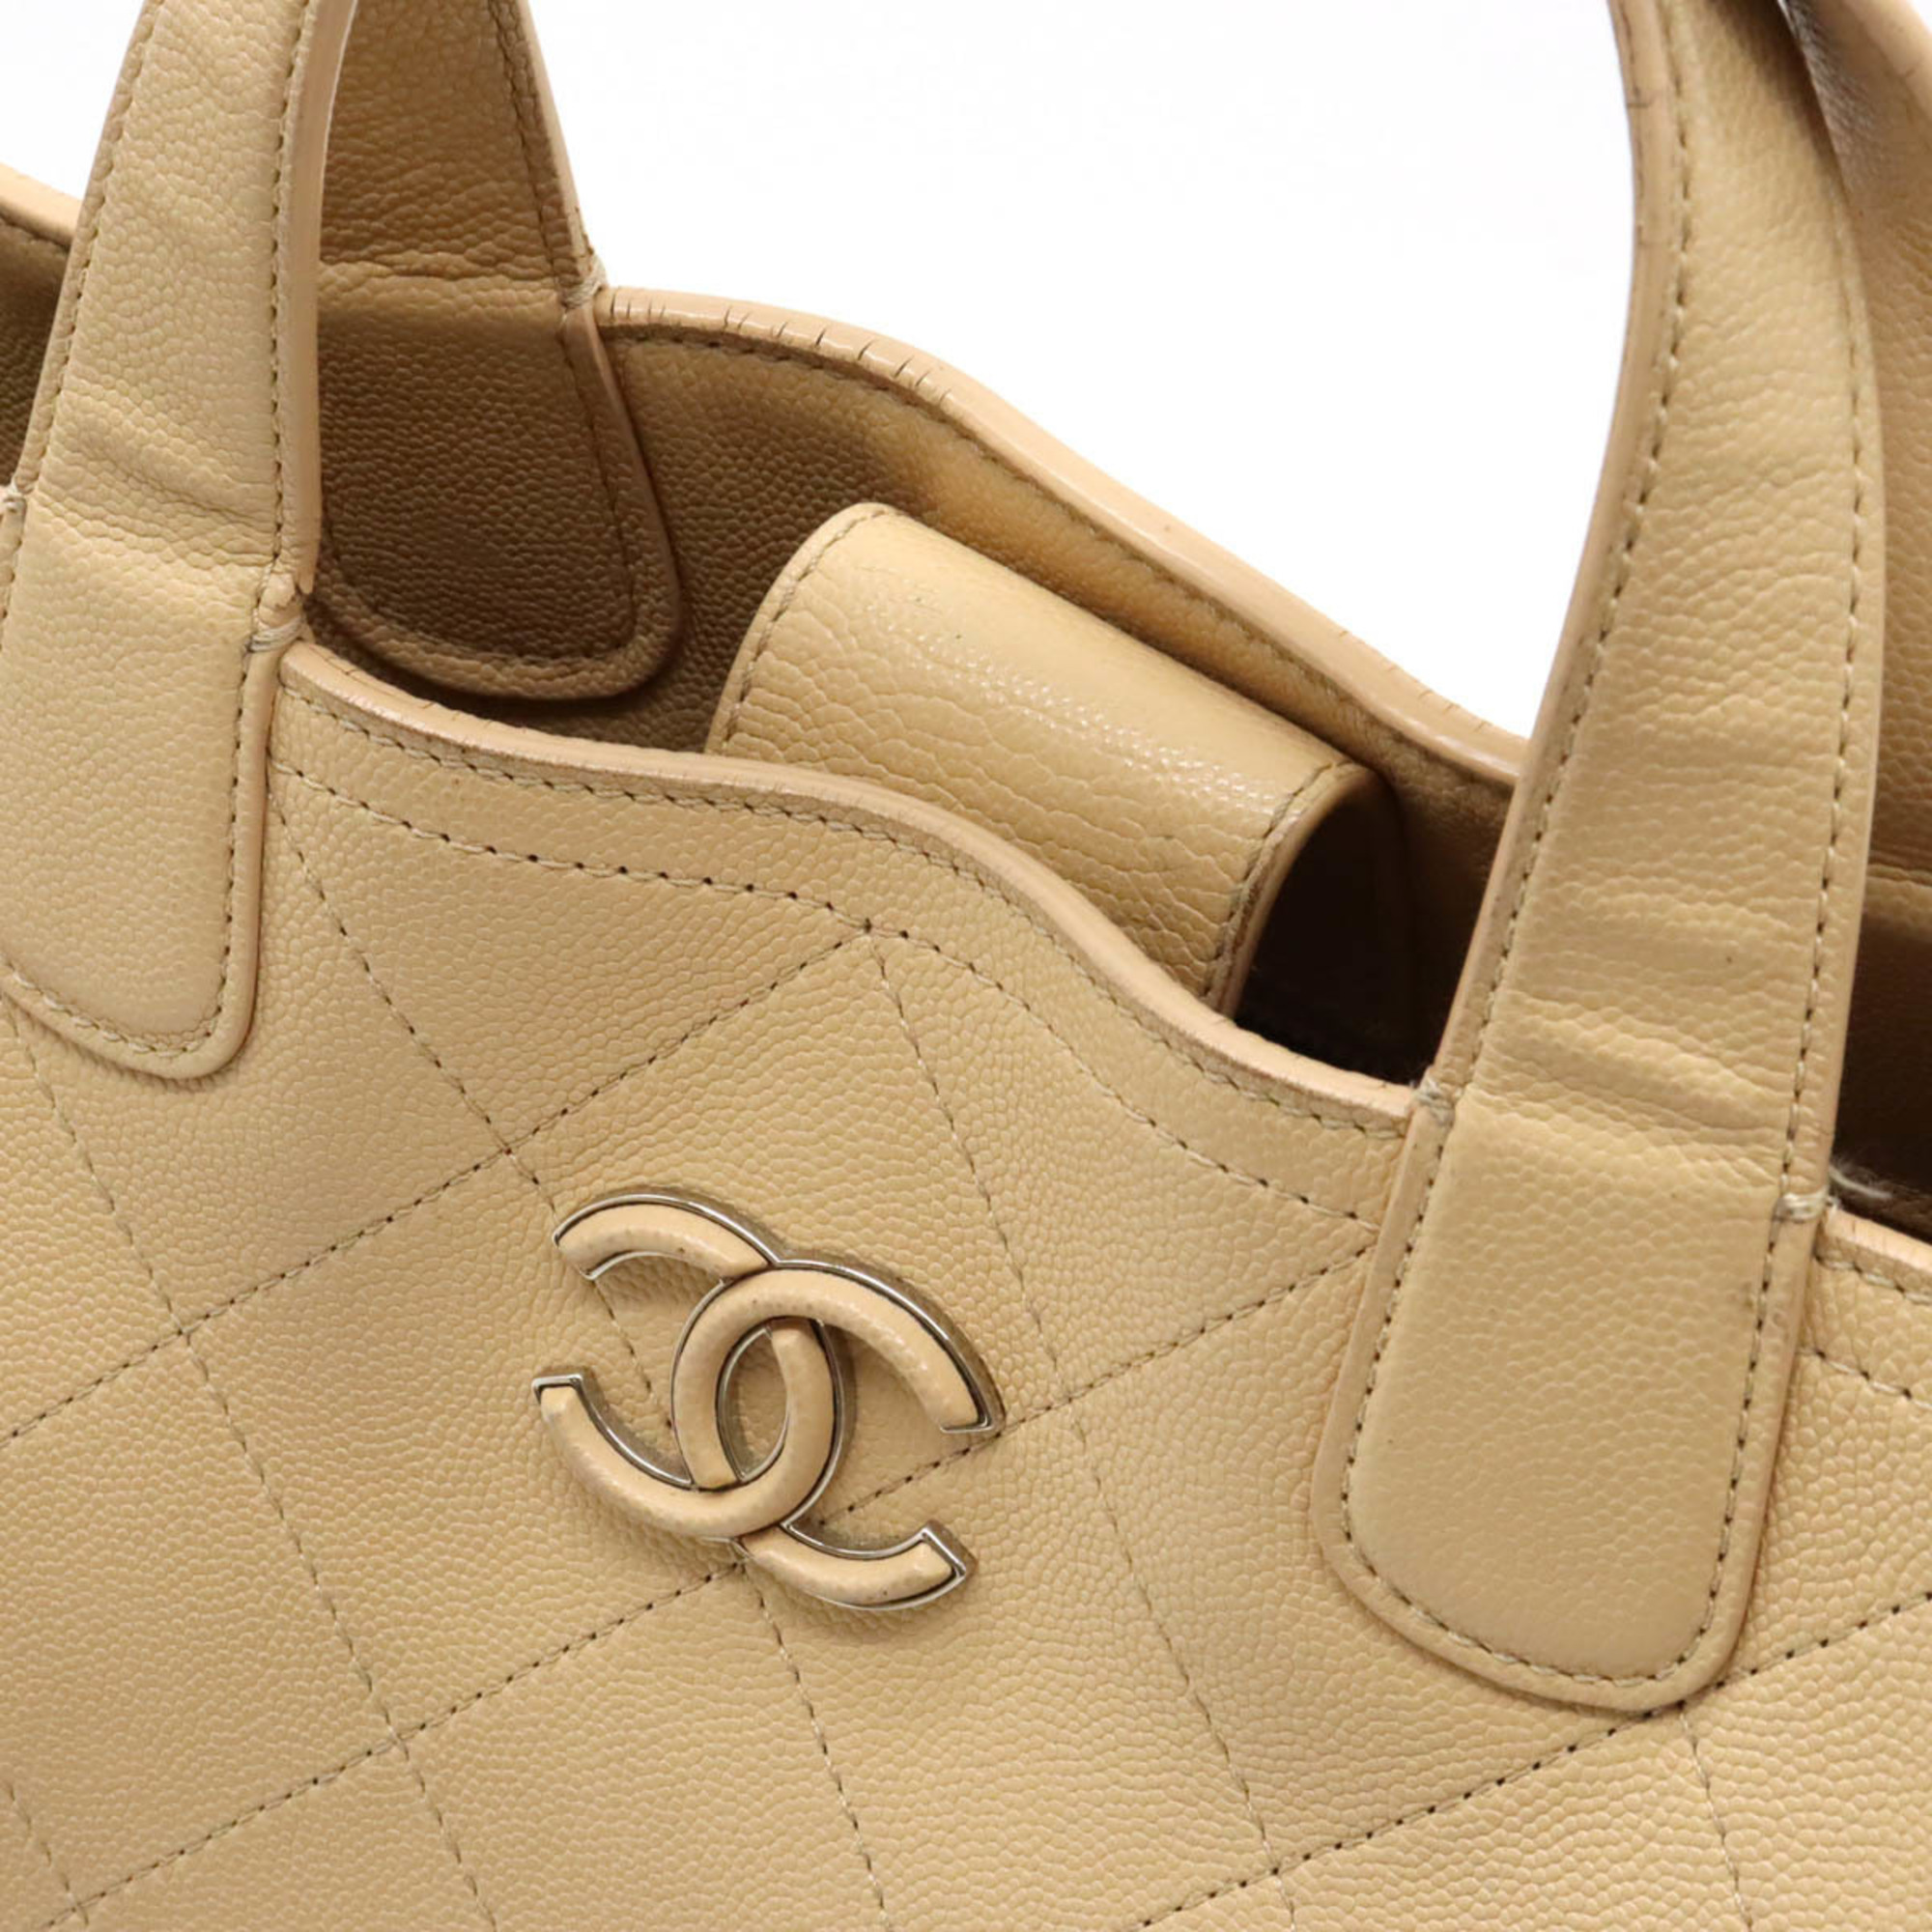 CHANEL Chanel Matelasse Coco Mark Tote Bag Chain Shoulder Caviar Skin Leather Beige AS0240